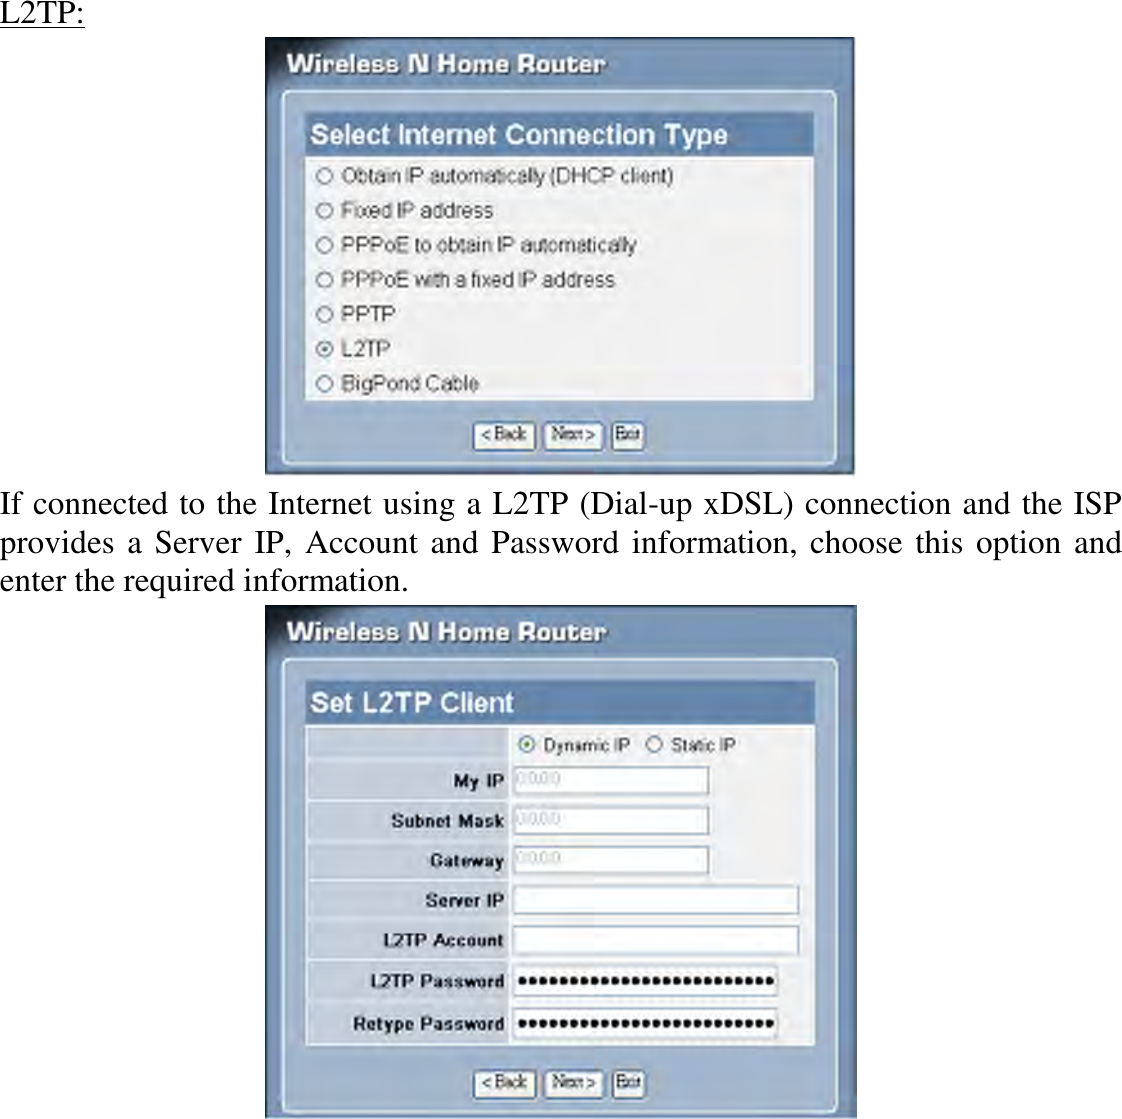 L2TP:  If connected to the Internet using a L2TP (Dial-up xDSL) connection and the ISP provides a Server IP, Account and Password information, choose this option and enter the required information.  